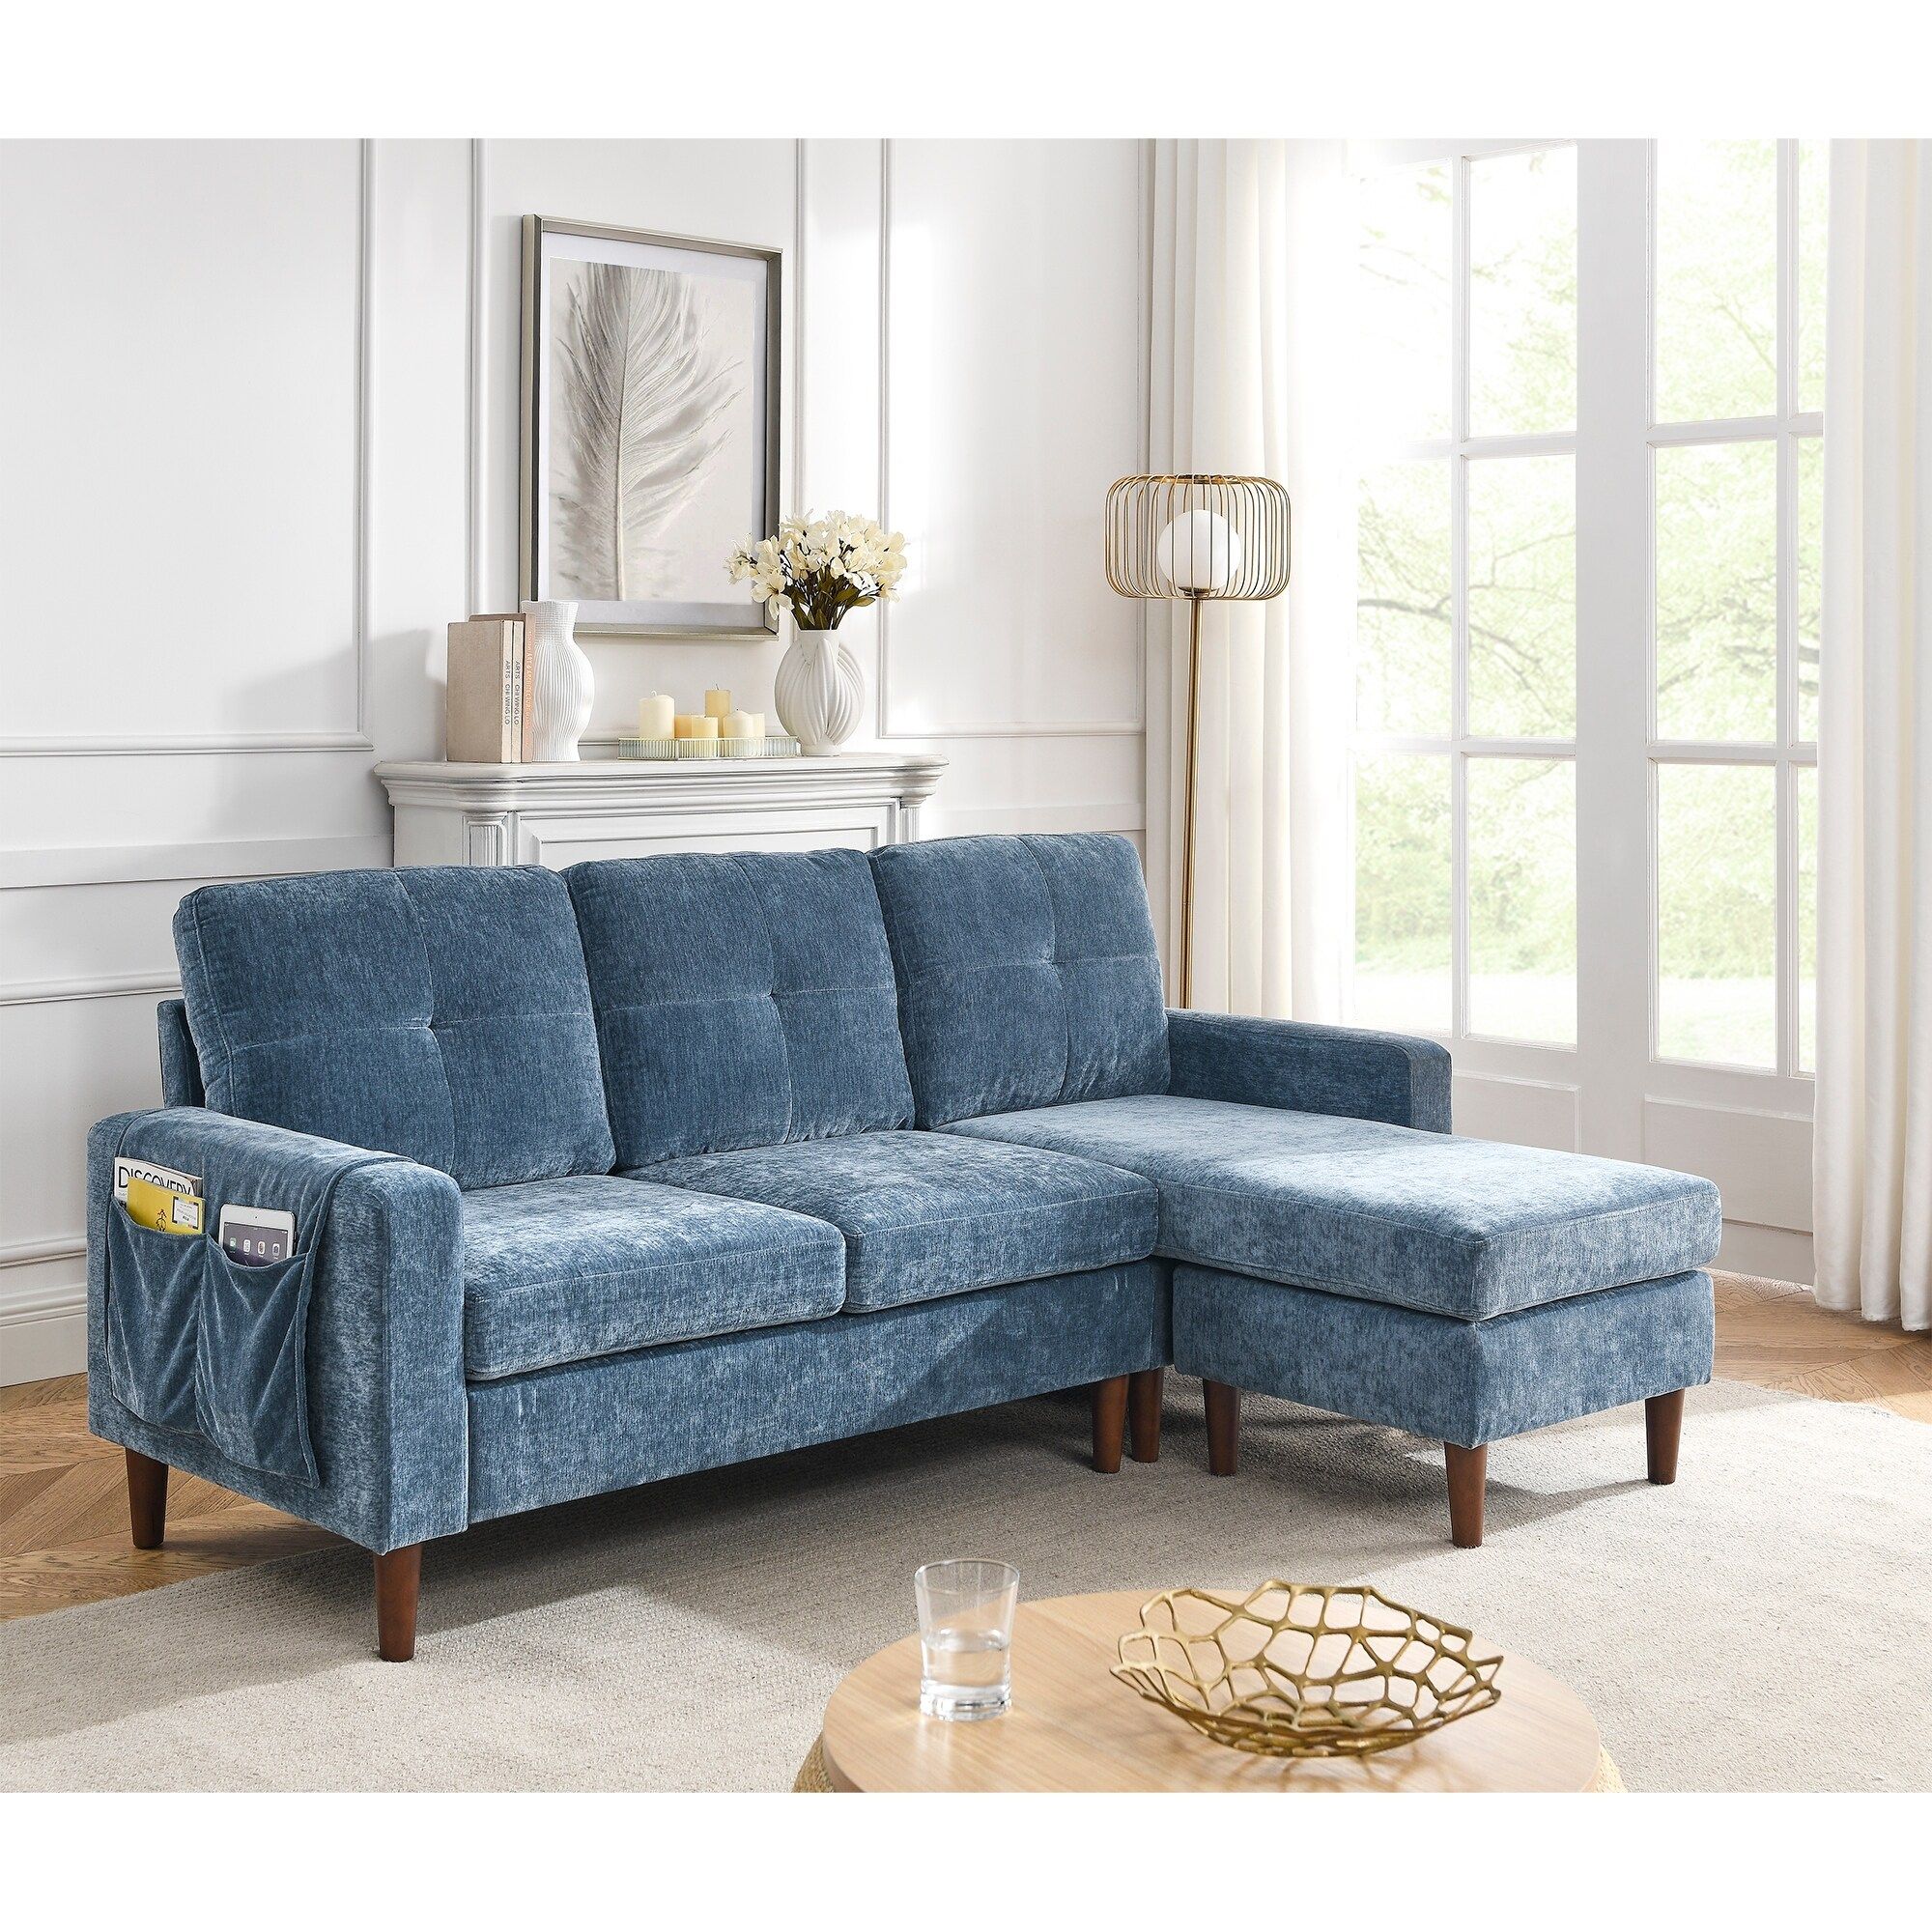 80" Convertible Sectional Sofa Set 3 Seater L Shape Couch Set For Living  Room With Side Pocket And Removable Cushions Sofa – Bed Bath & Beyond –  38372035 For 3 Seat Convertible Sectional Sofas (View 11 of 15)